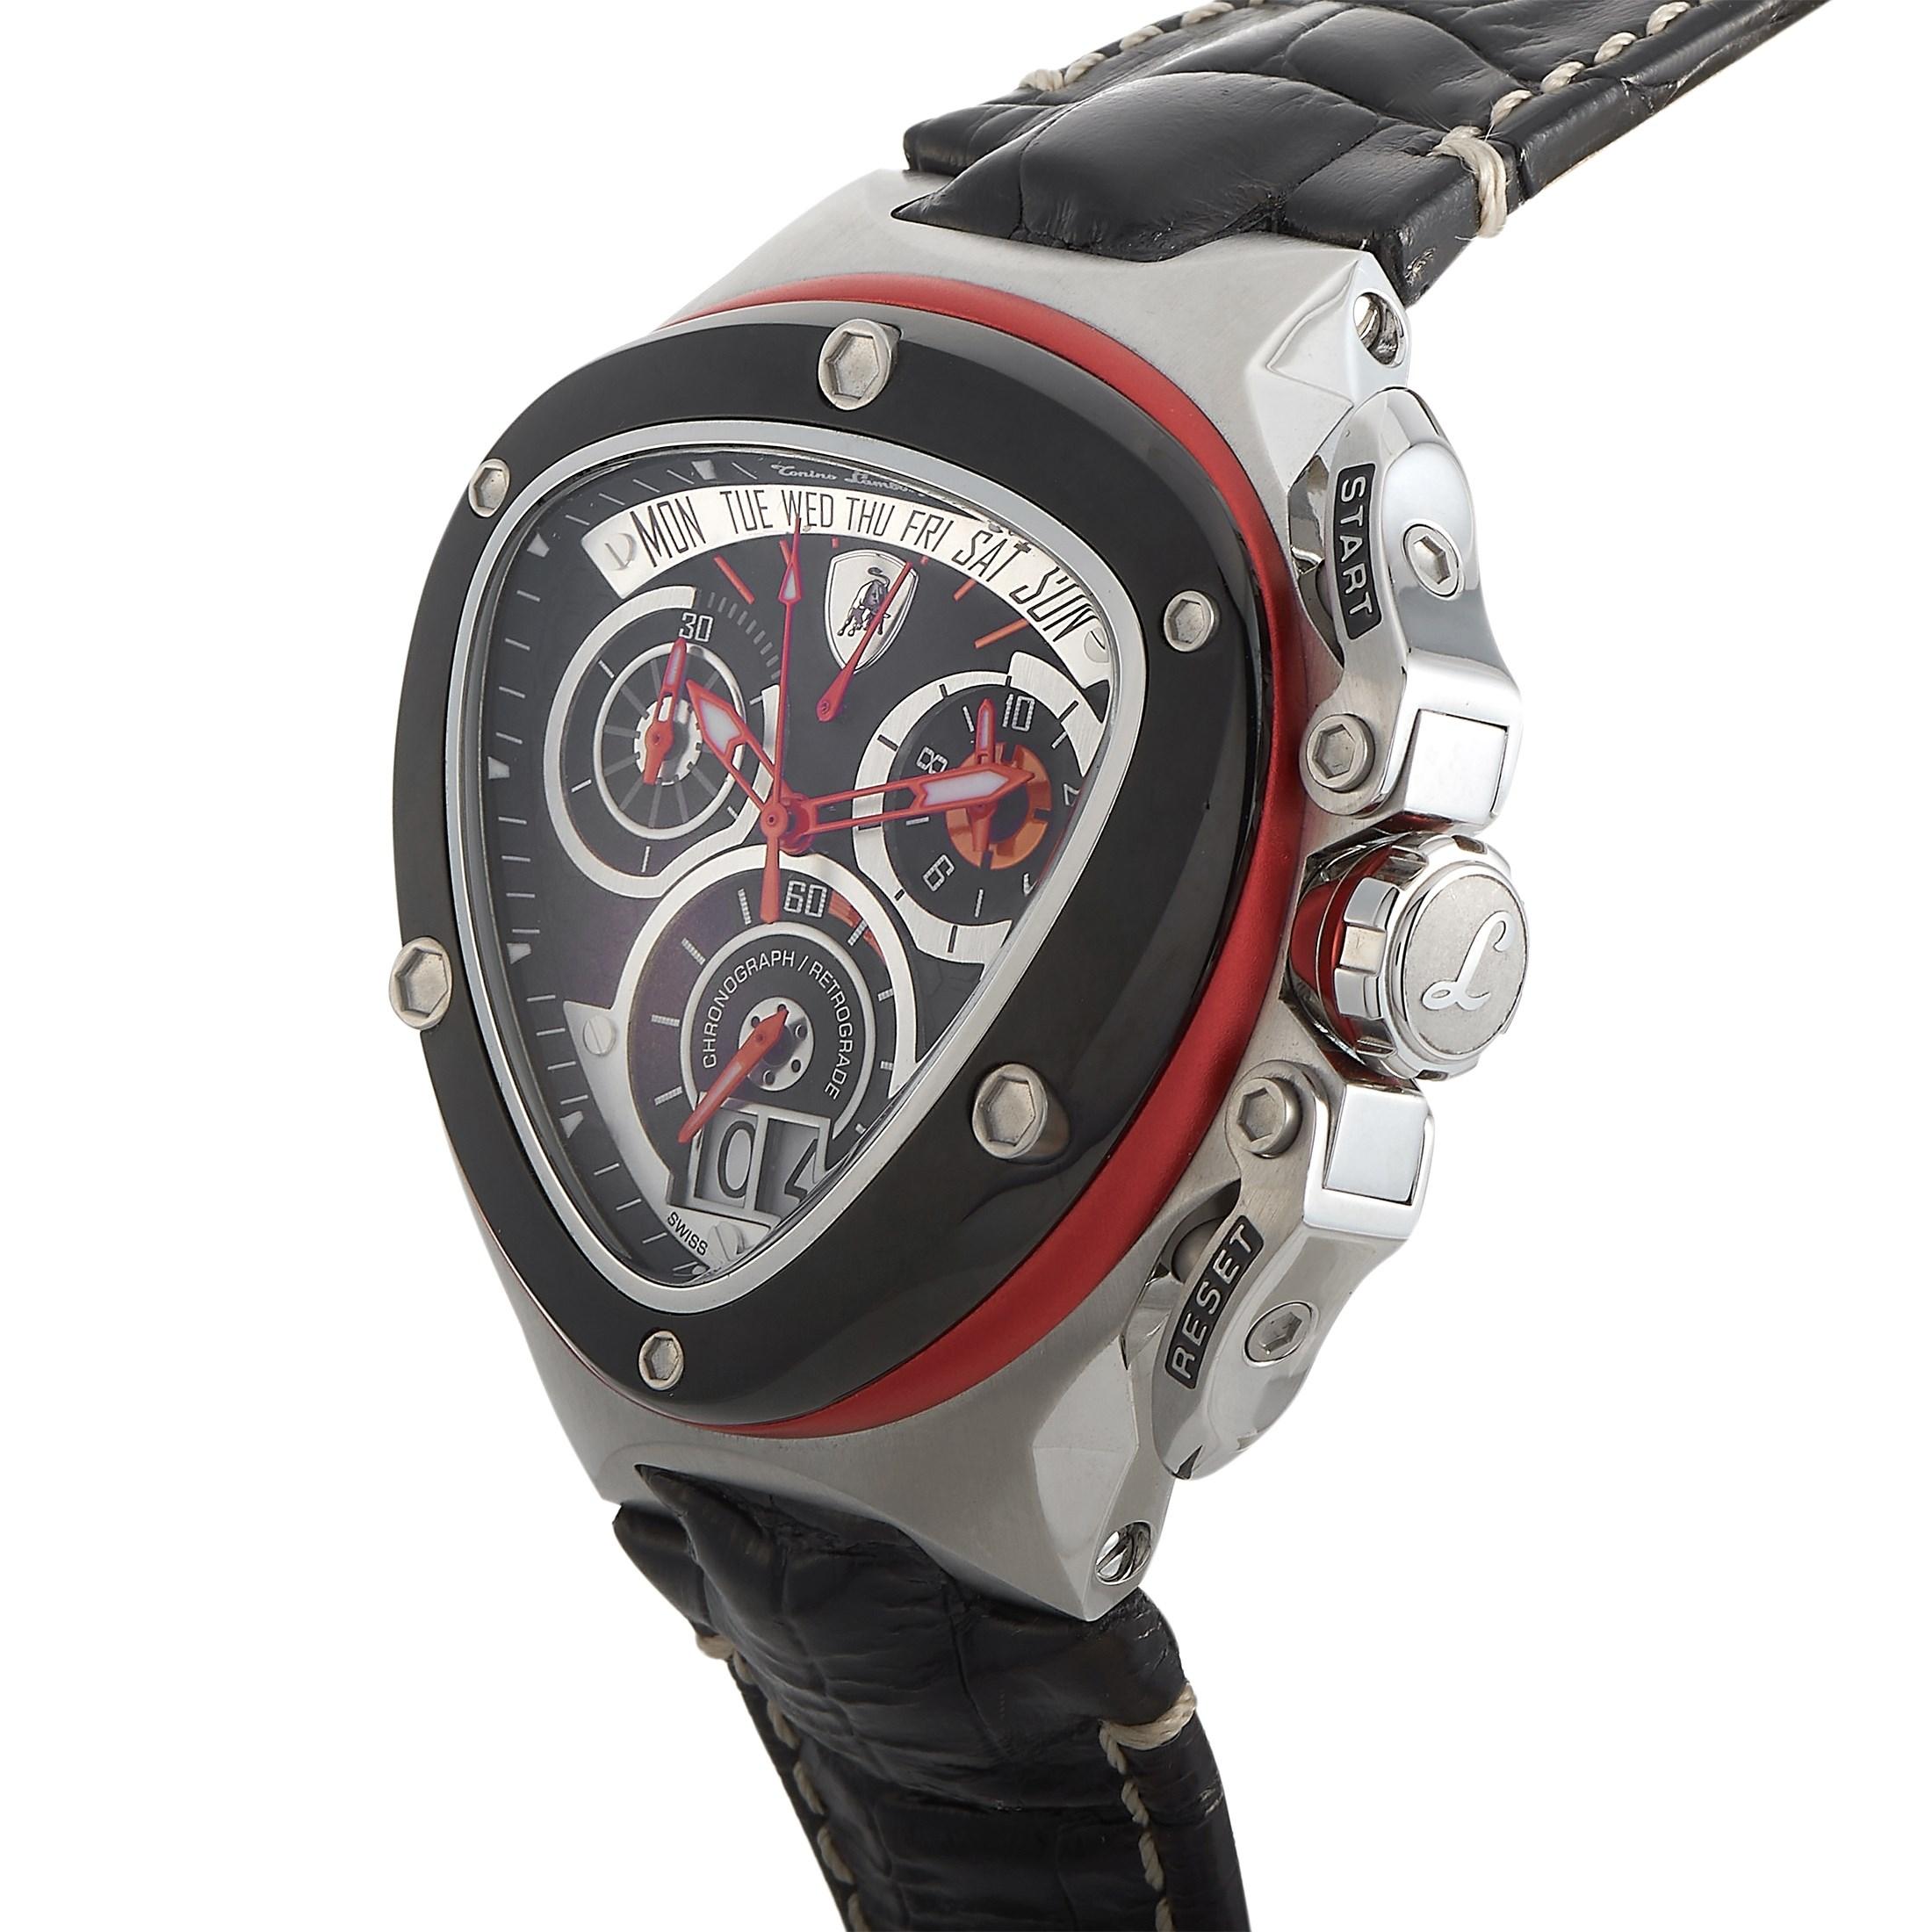 This is the Tonino Lamborghini Spyder Chronograph, reference number SW3004.

The watch boasts a stainless steel case that is fitted with a bezel made out of black PVD-plated stainless steel and red aluminum. The case is water-resistant to 100 meters